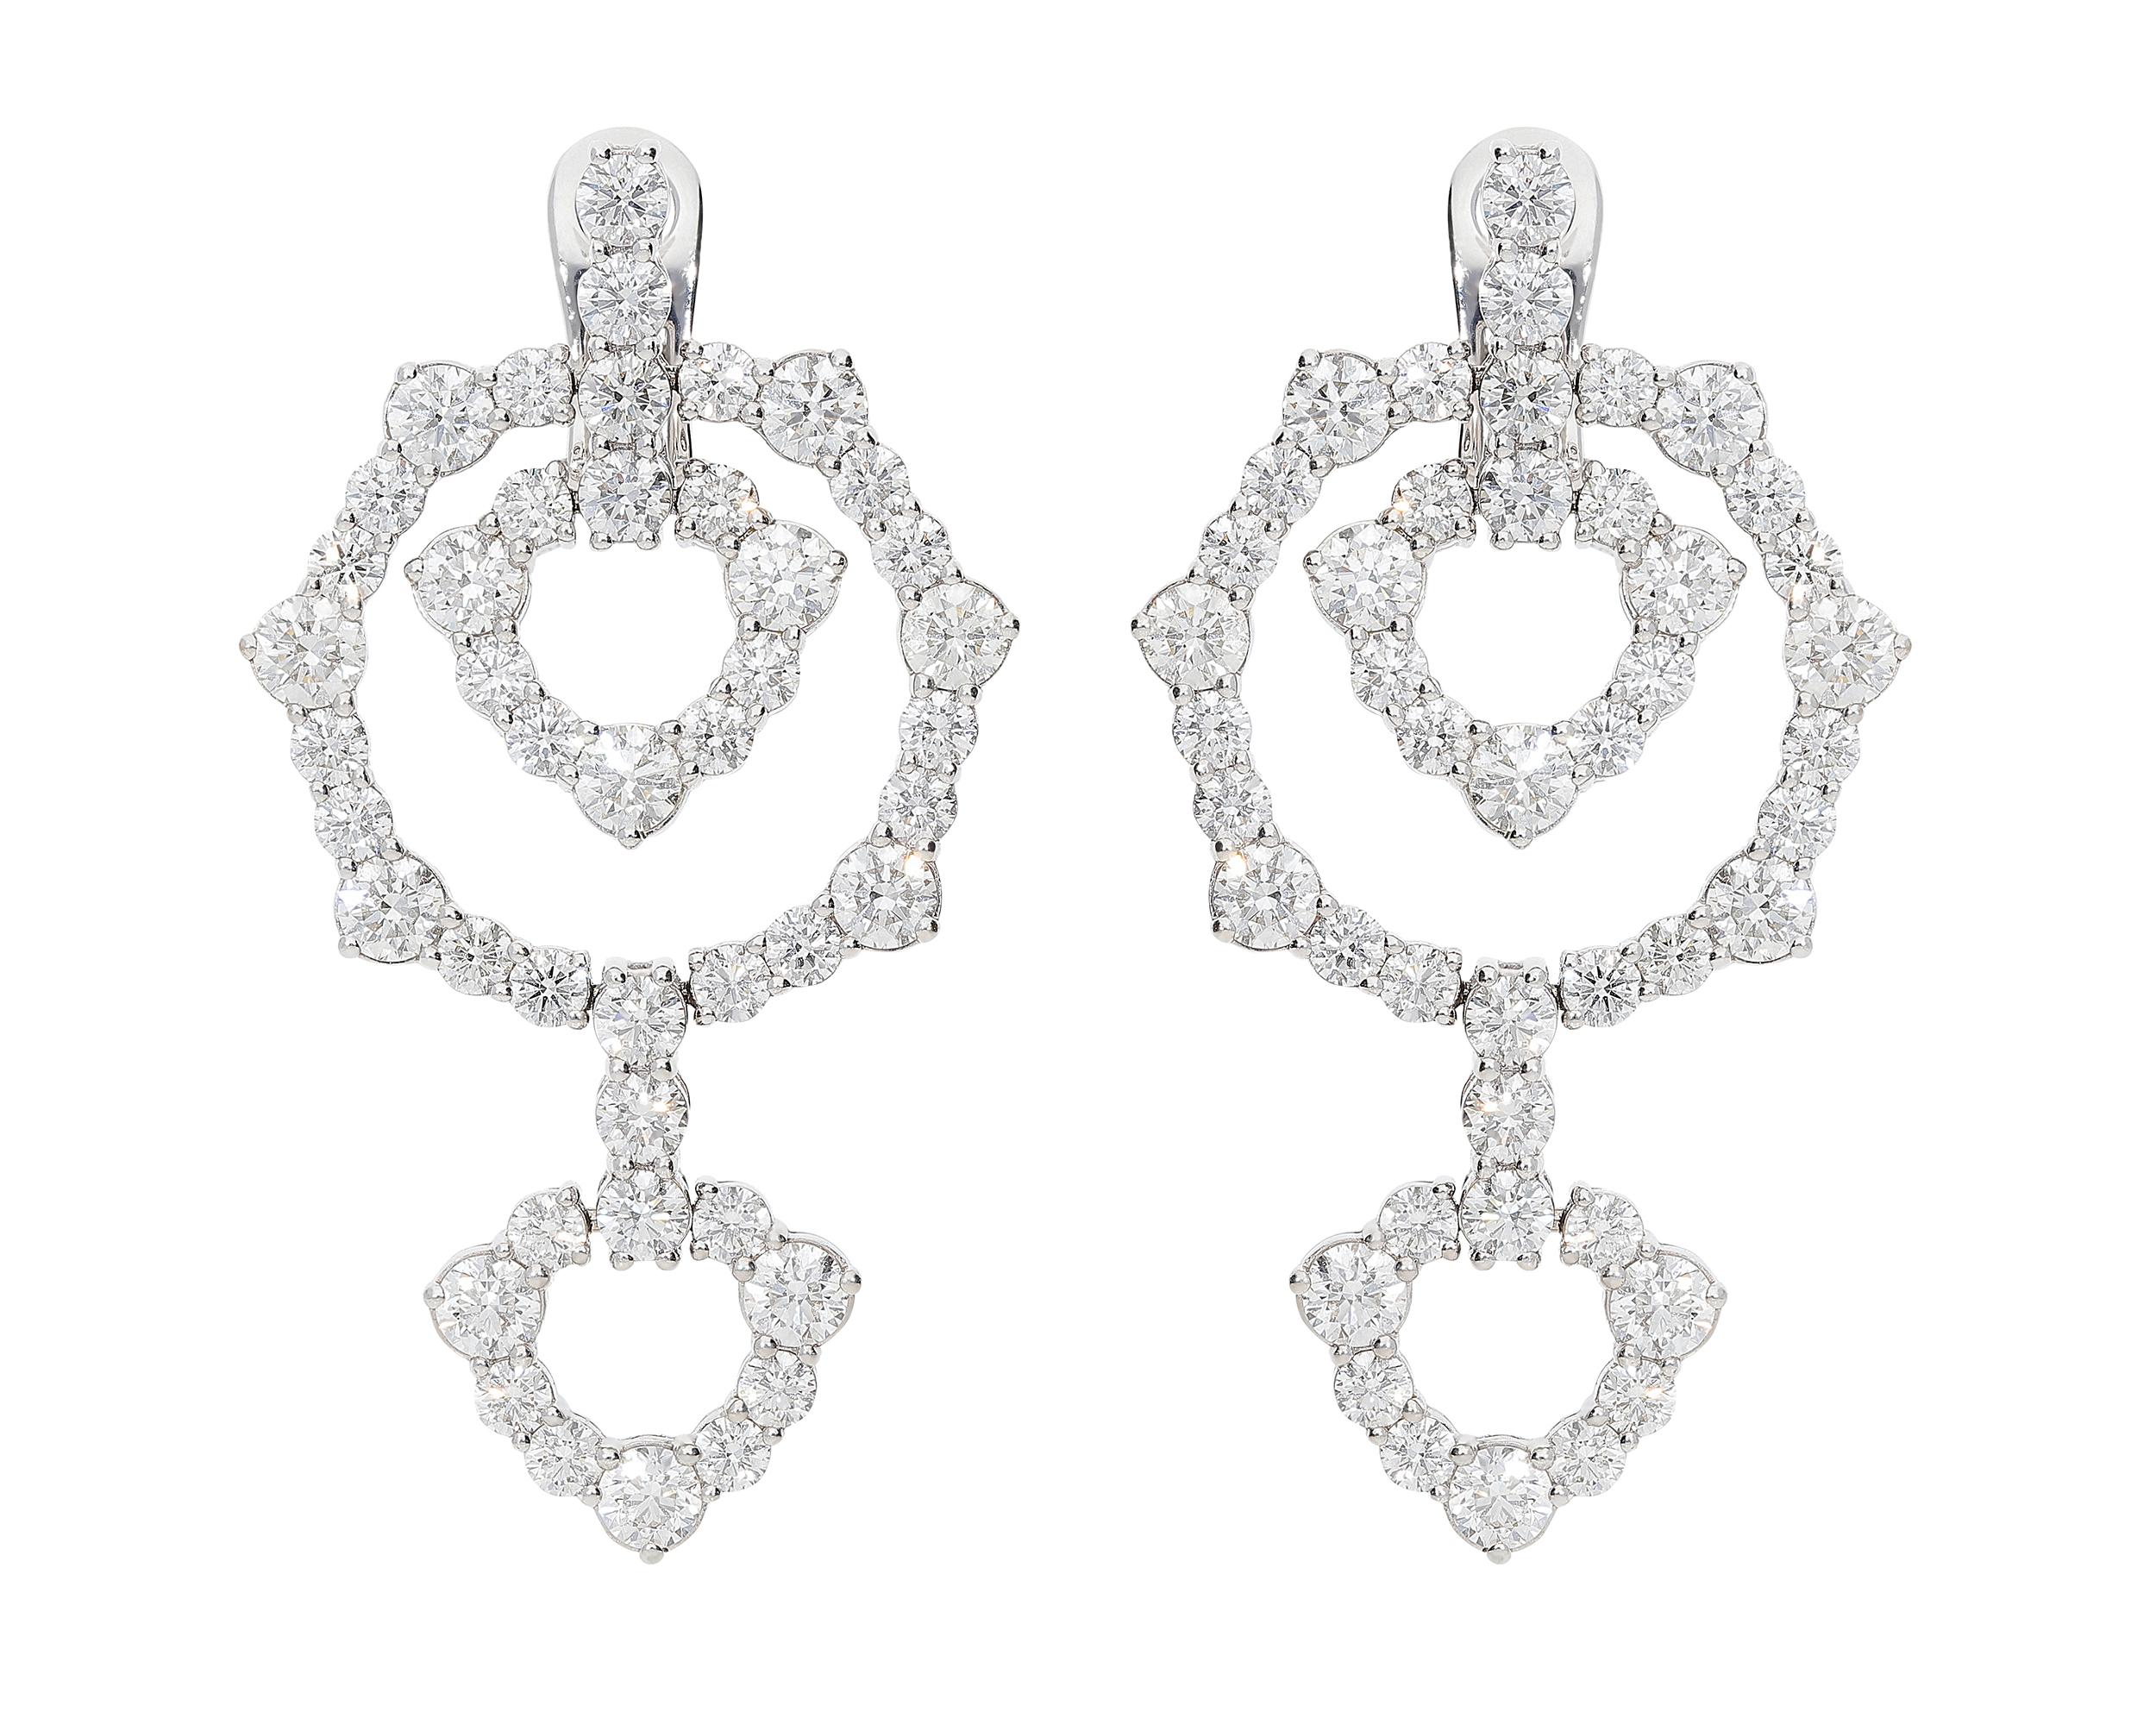 Geometric inspiration for these earrings in 18kt white gold for 19,80 grams and 12,26 carats of white round brilliant diamonds color G clarity VS.
Their length is 5 centimeters and the diameter of the biggest concentric element is 3 centimeters.